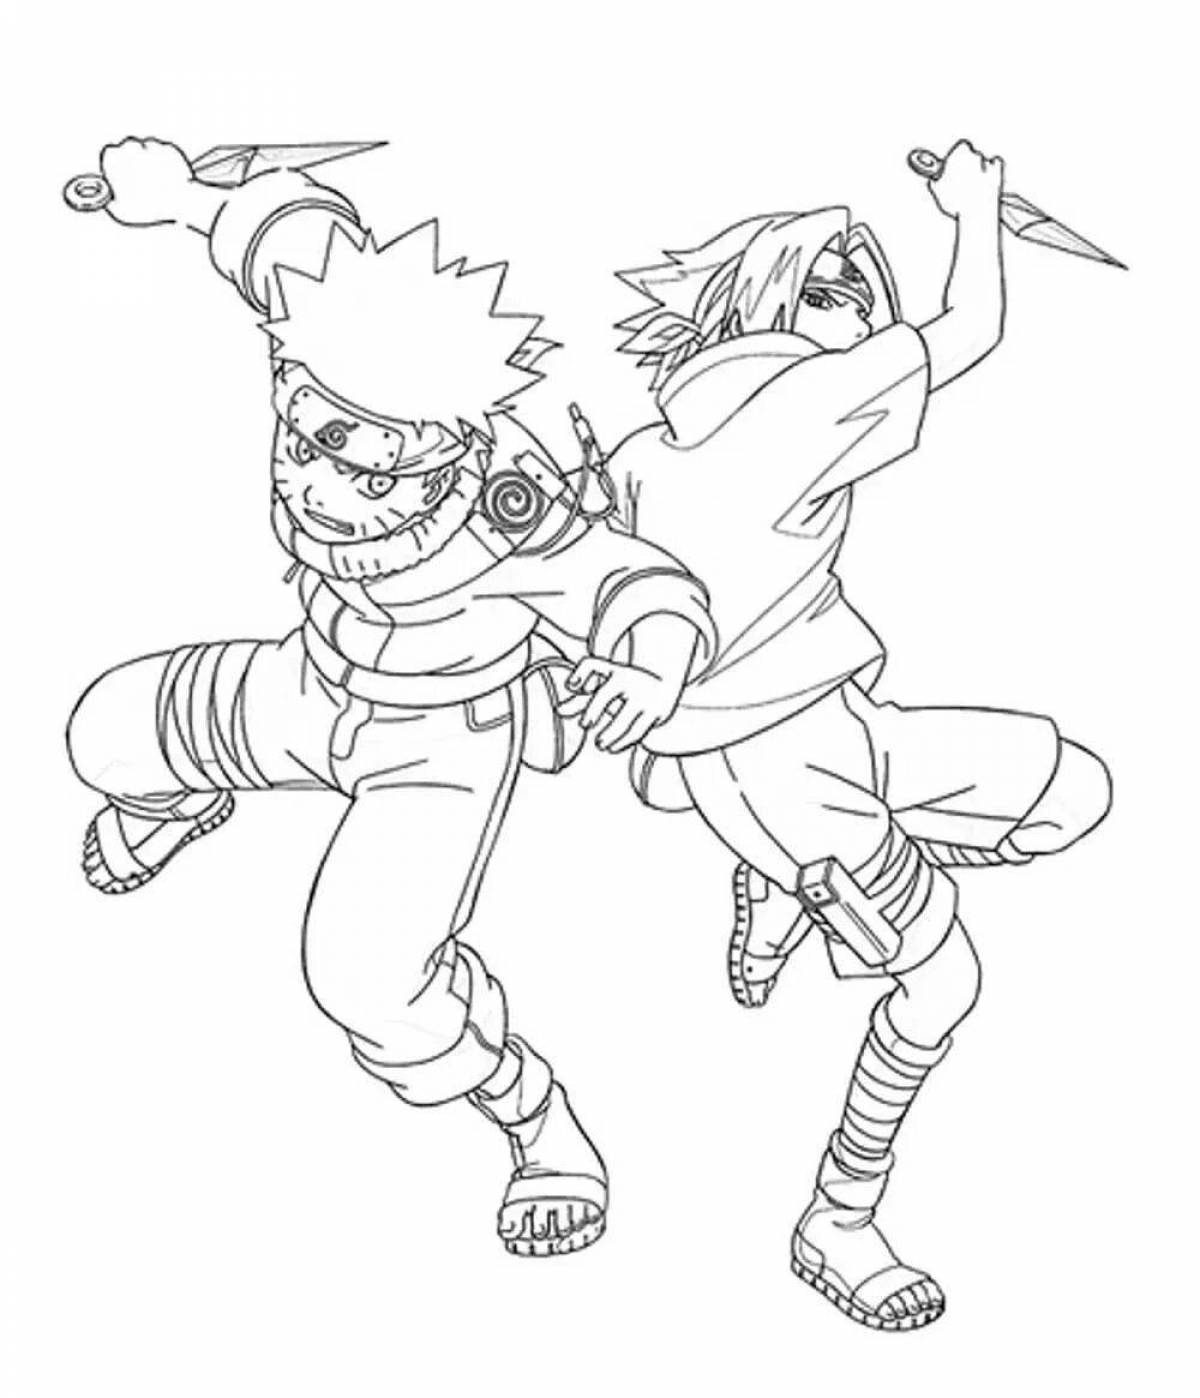 Radiant naruto game coloring page